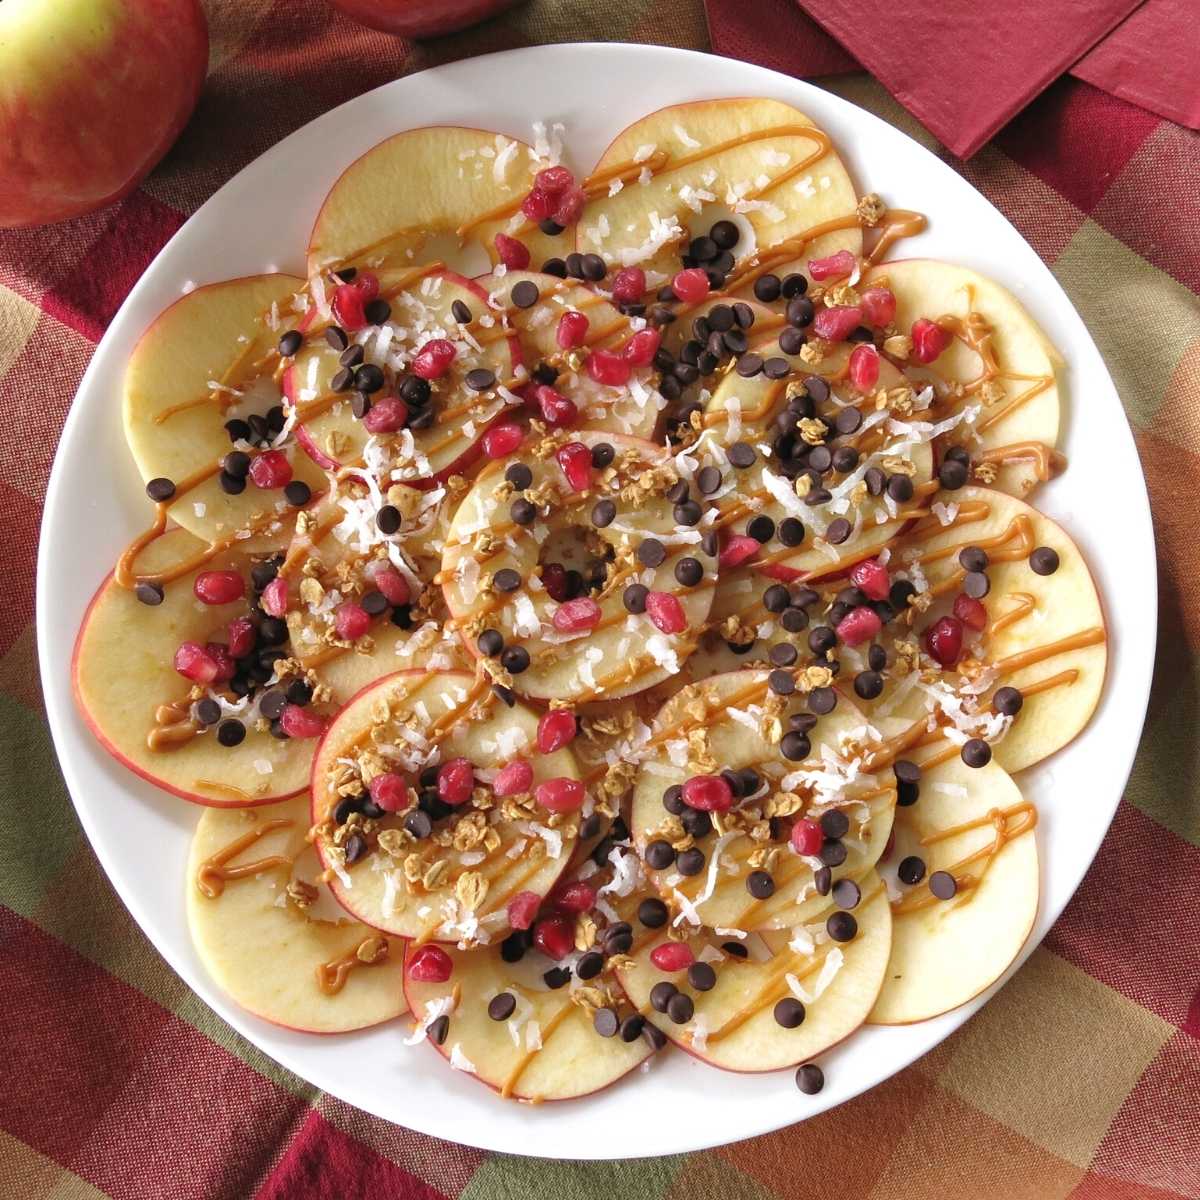 sliced apples with caramel sauce and toppings. 